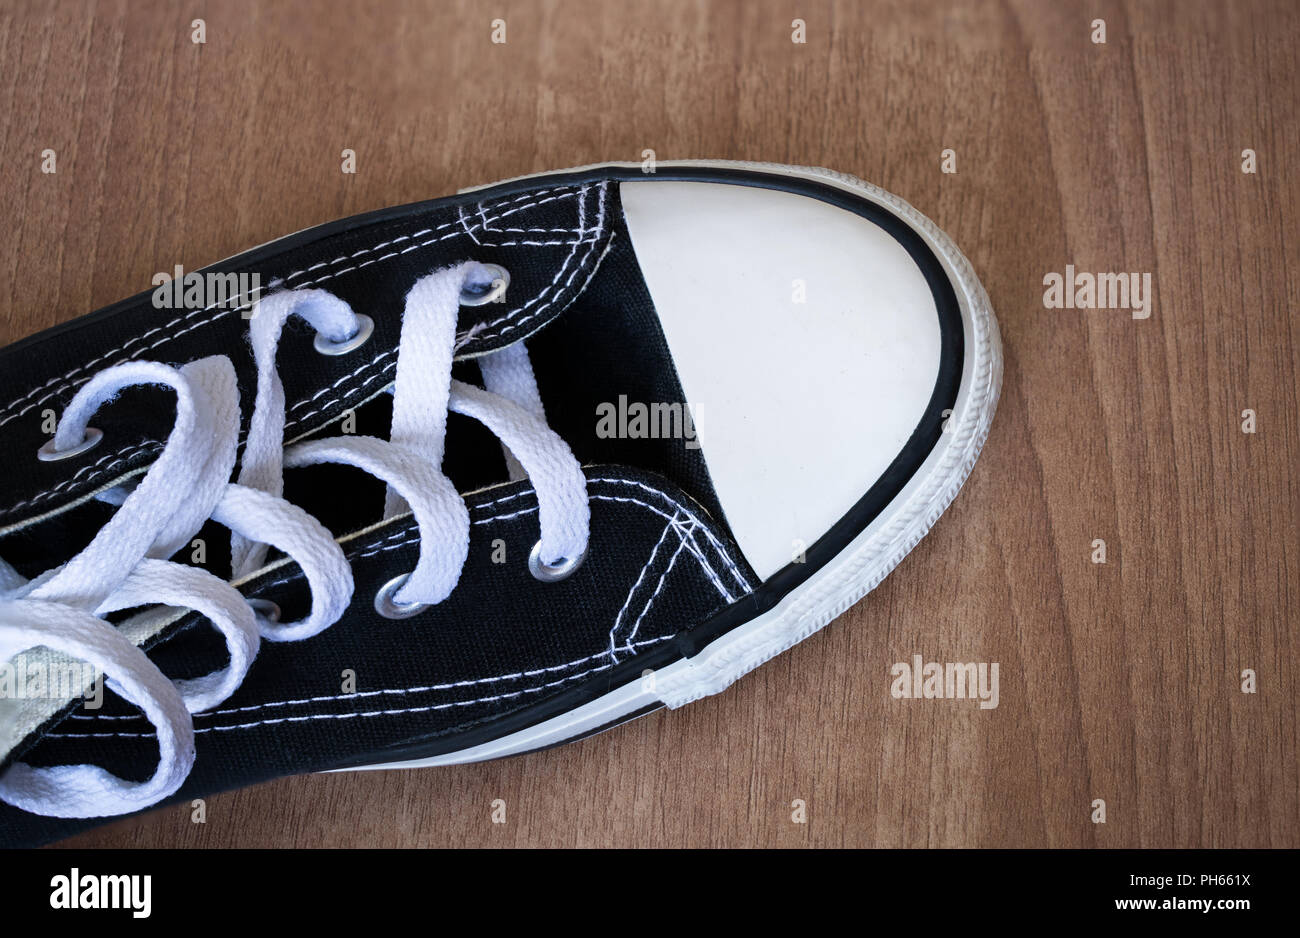 Black canvas sneakers style casual Stock Photo - Alamy